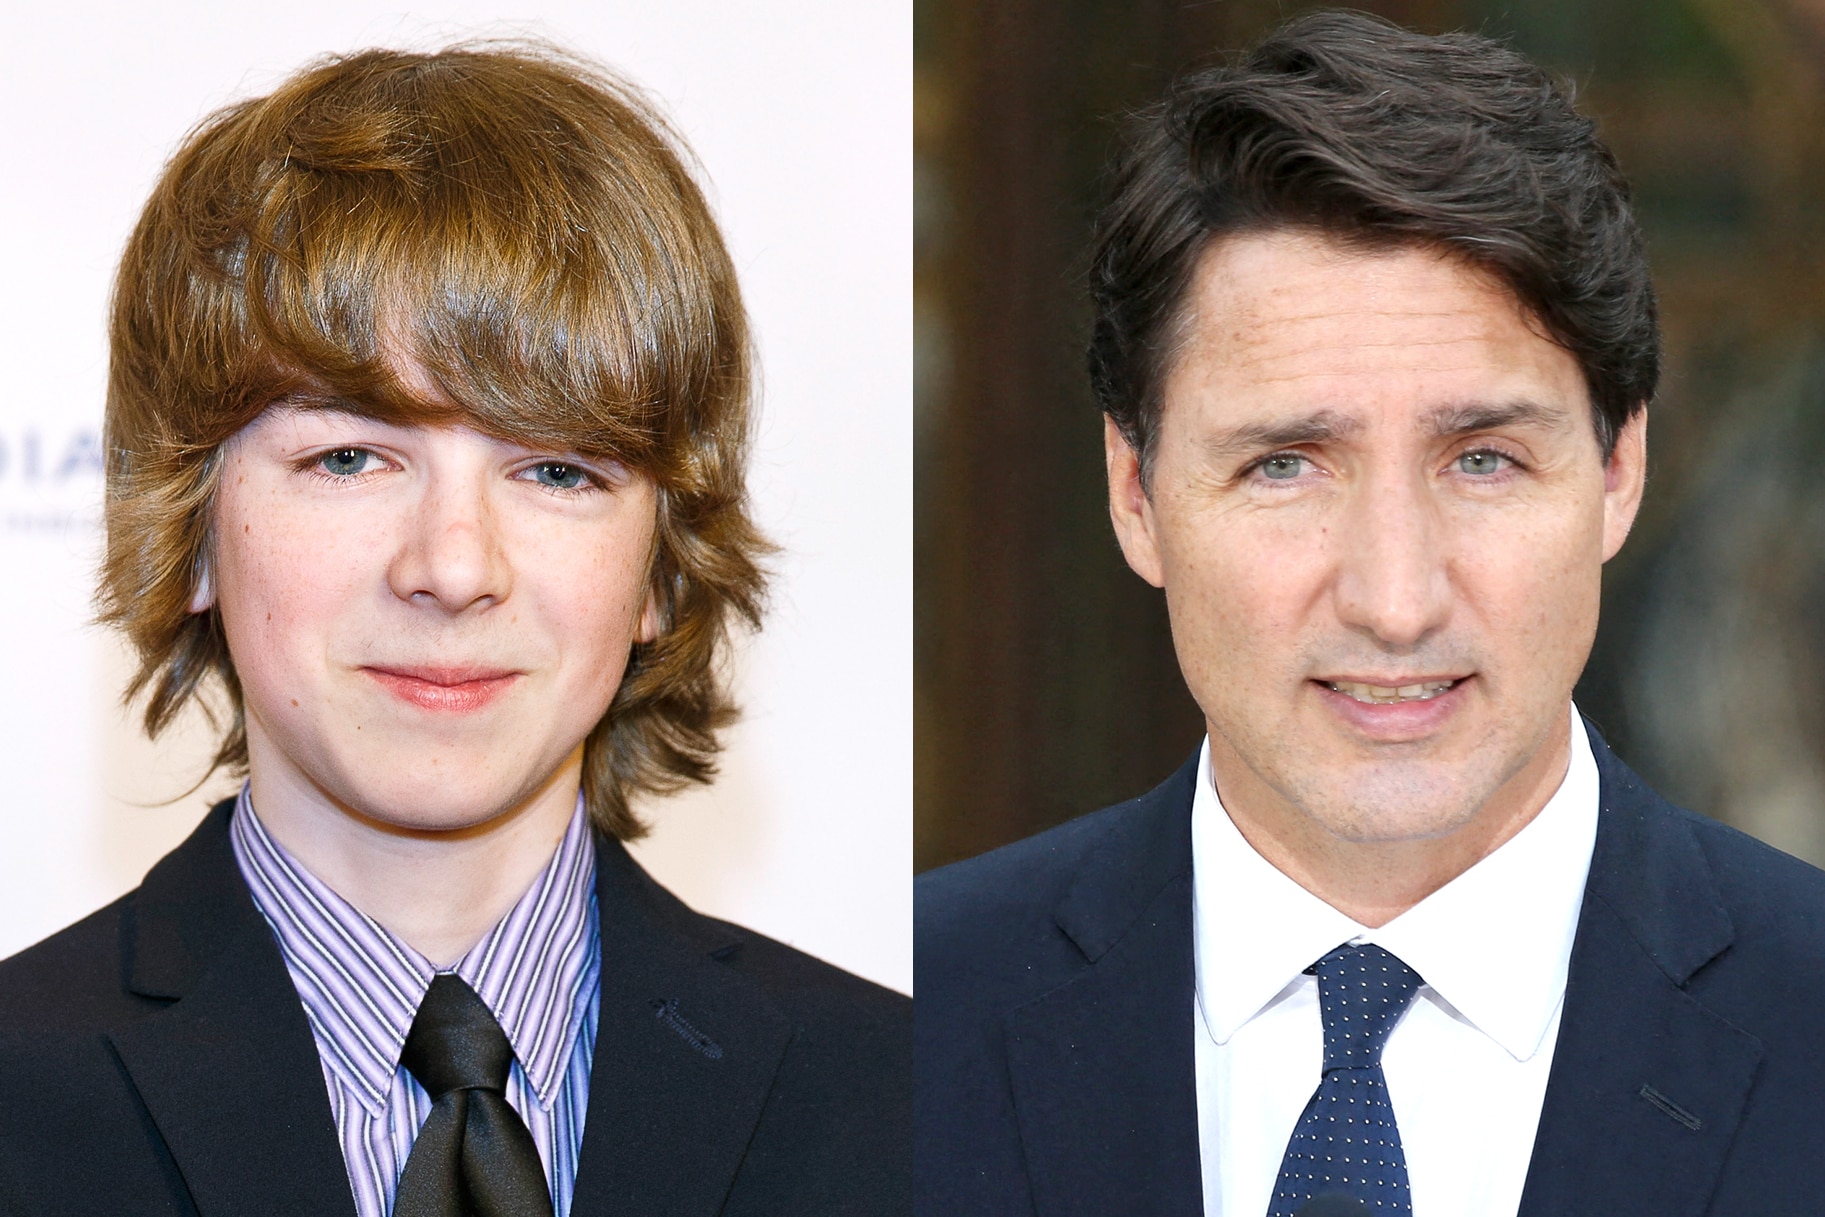 A split of Actor Ryan Grantham and Canada's Prime Minister Justin Trudeau